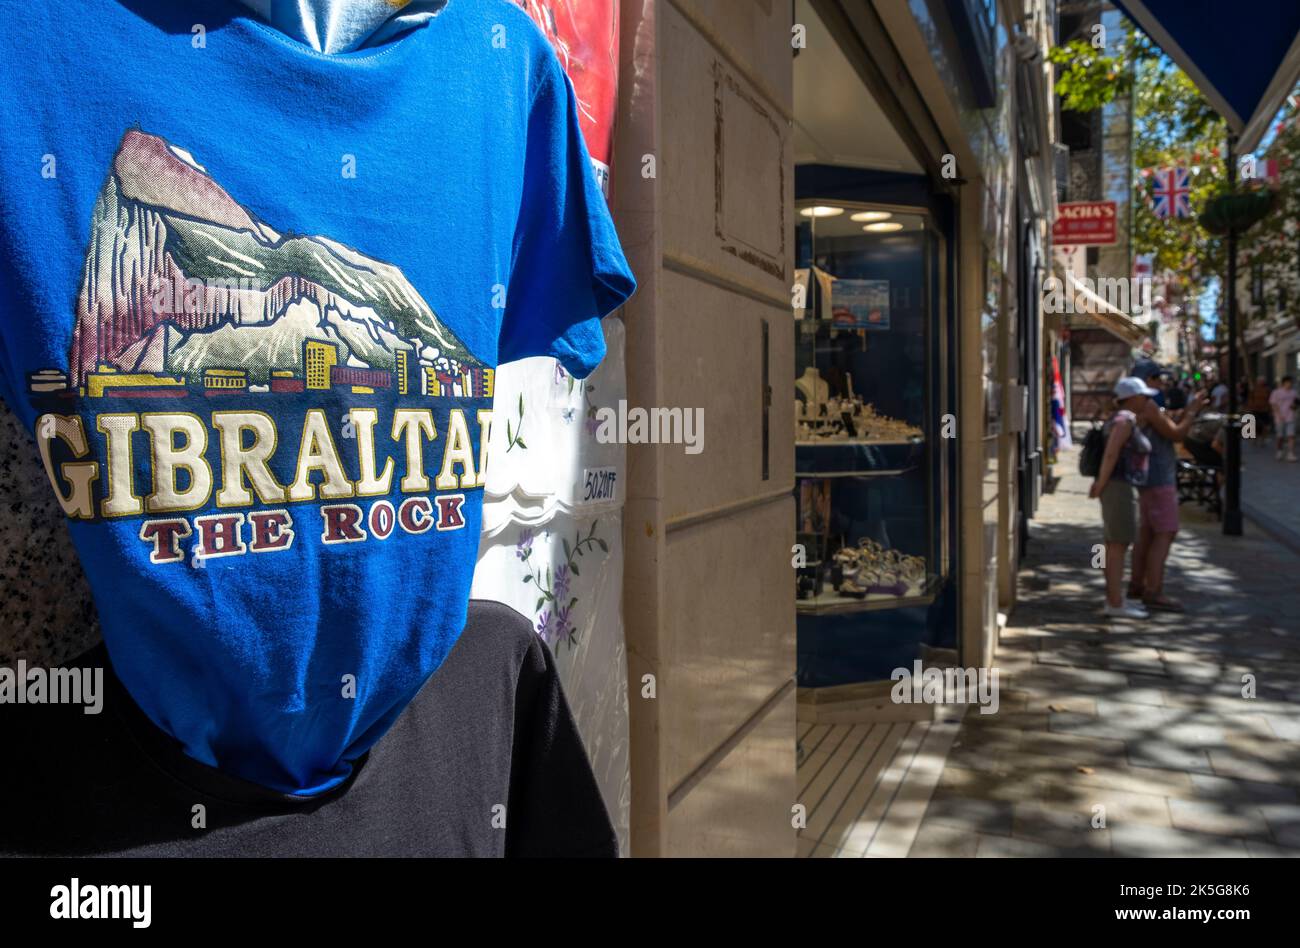 Gibraltar. 5th September 2022. Close up of blue t-shirt on display outside a souvenir shop in Main Street, Gibraltar. Stock Photo